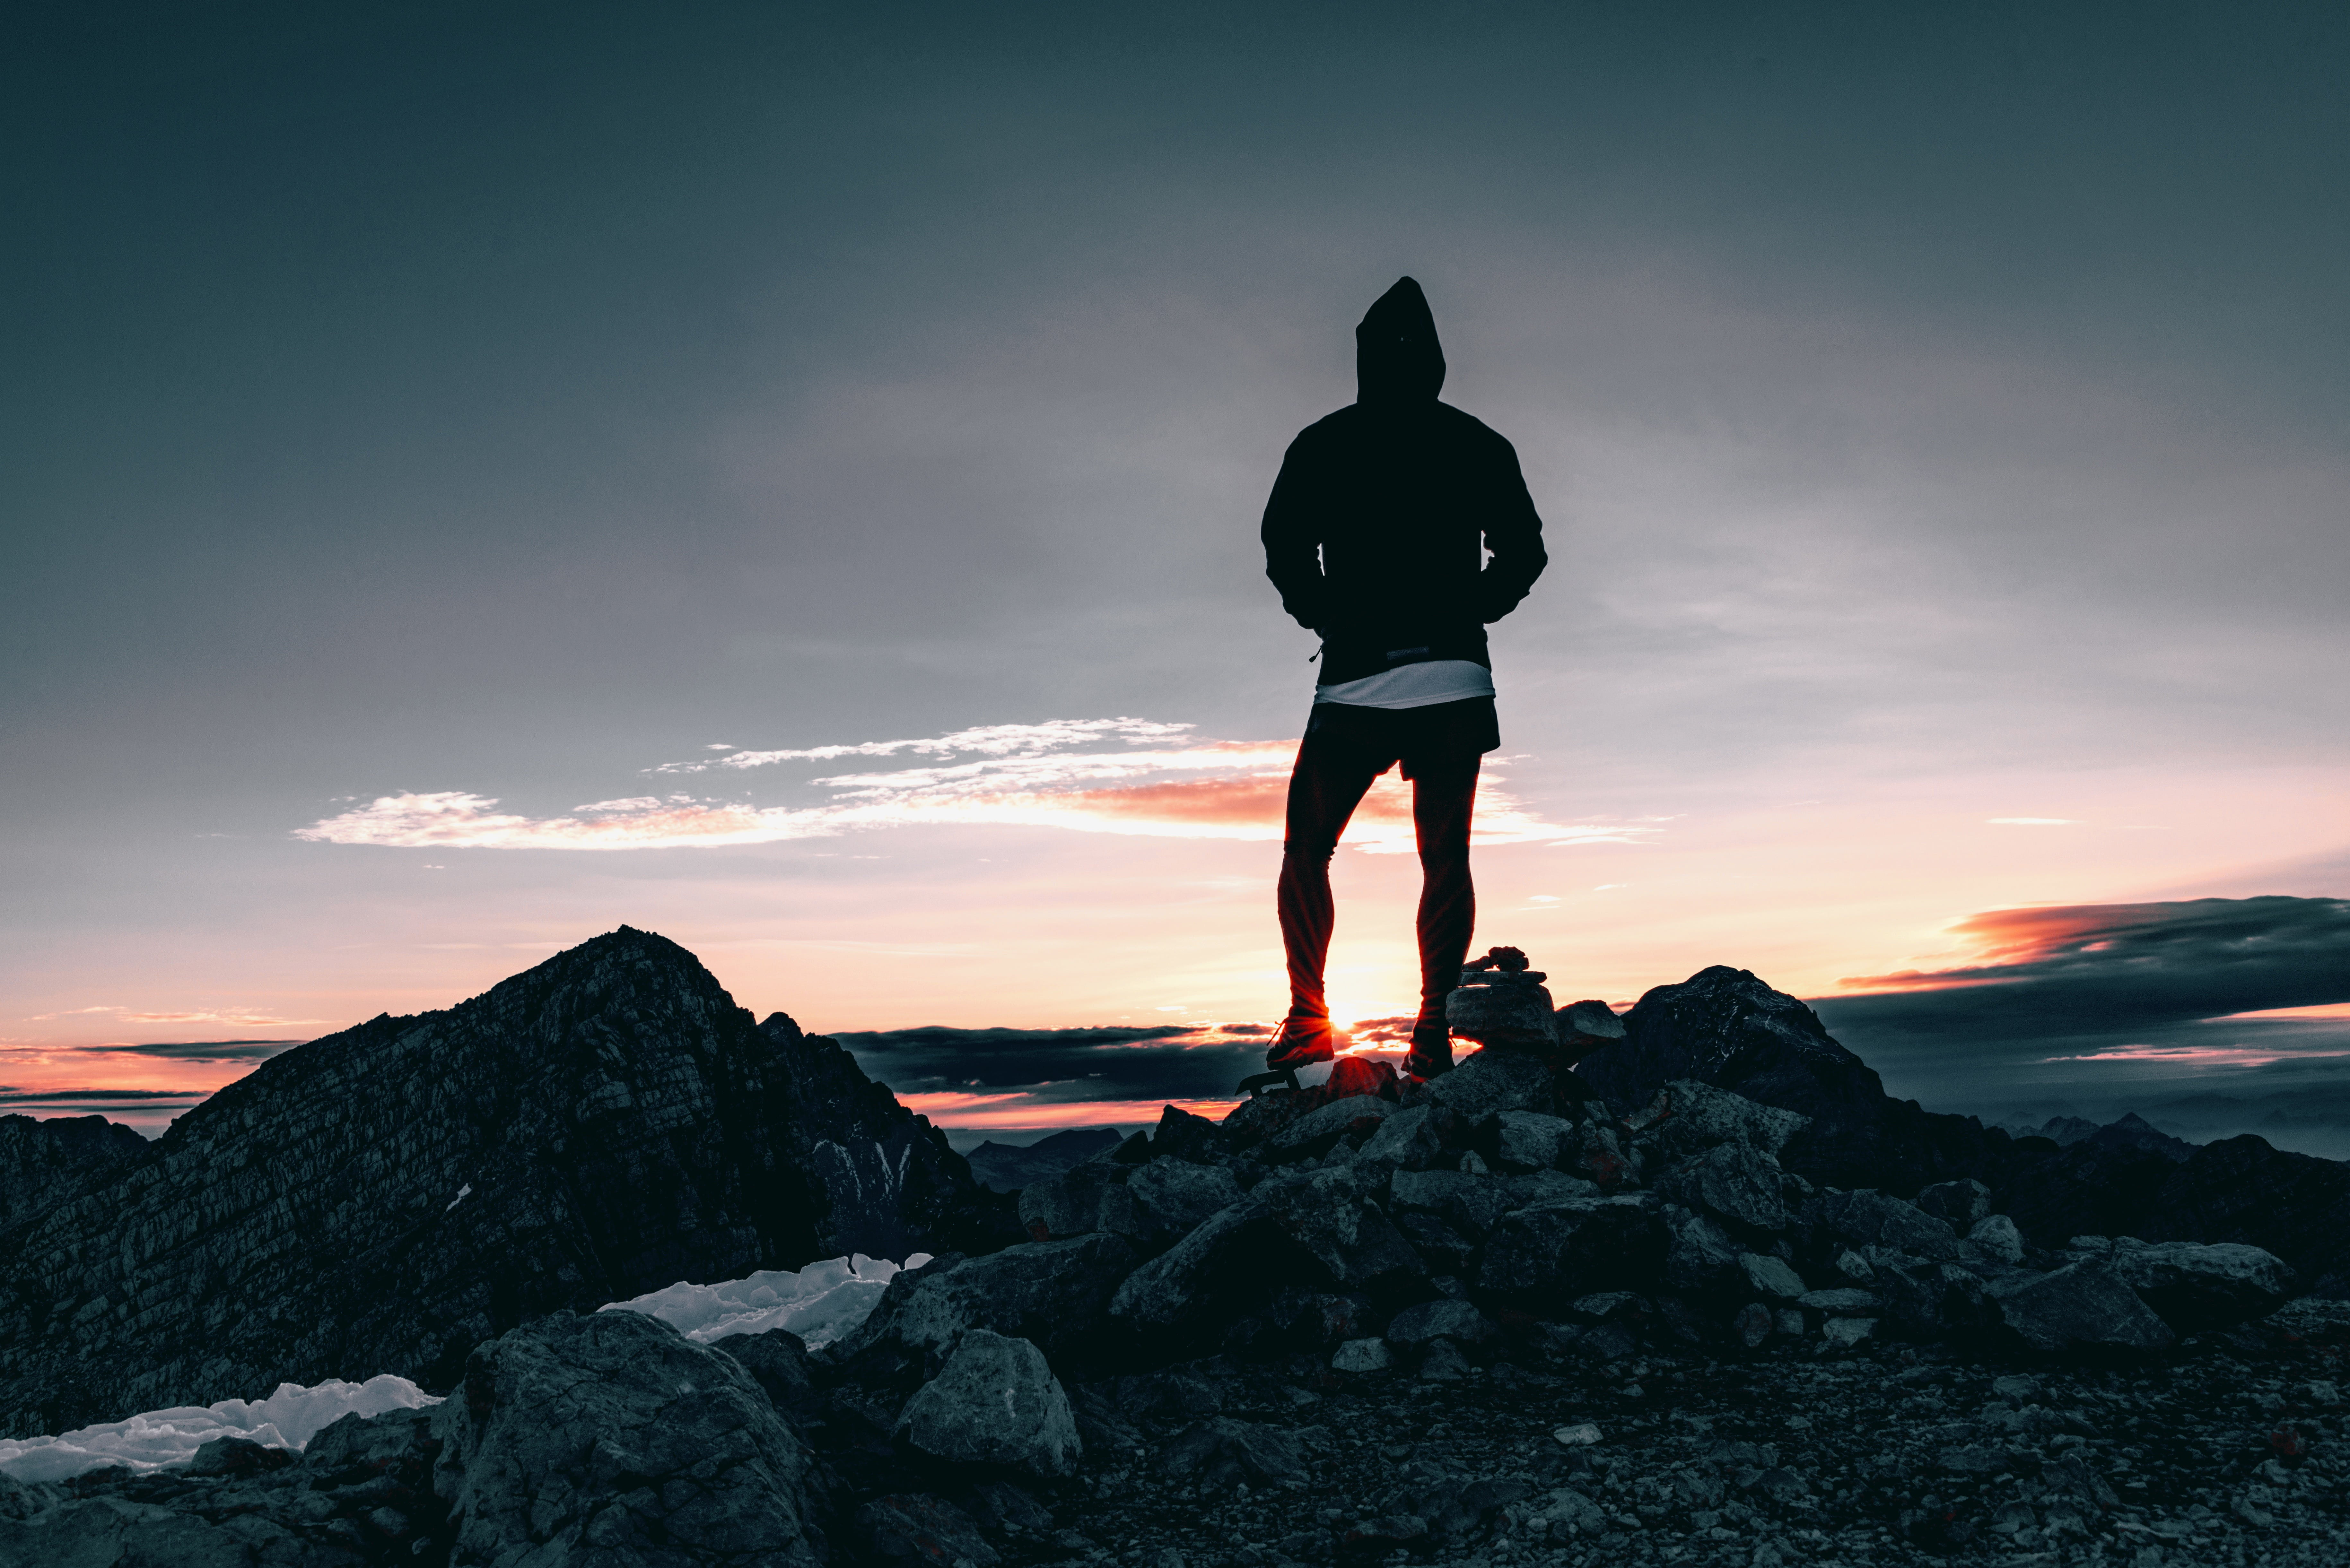 Man In Black Hoodie Standing On Stone At Daytime Hd Wallpaper Wallpaper Flare Enjoy and share your favorite beautiful hd wallpapers and background images. wallpaperflare